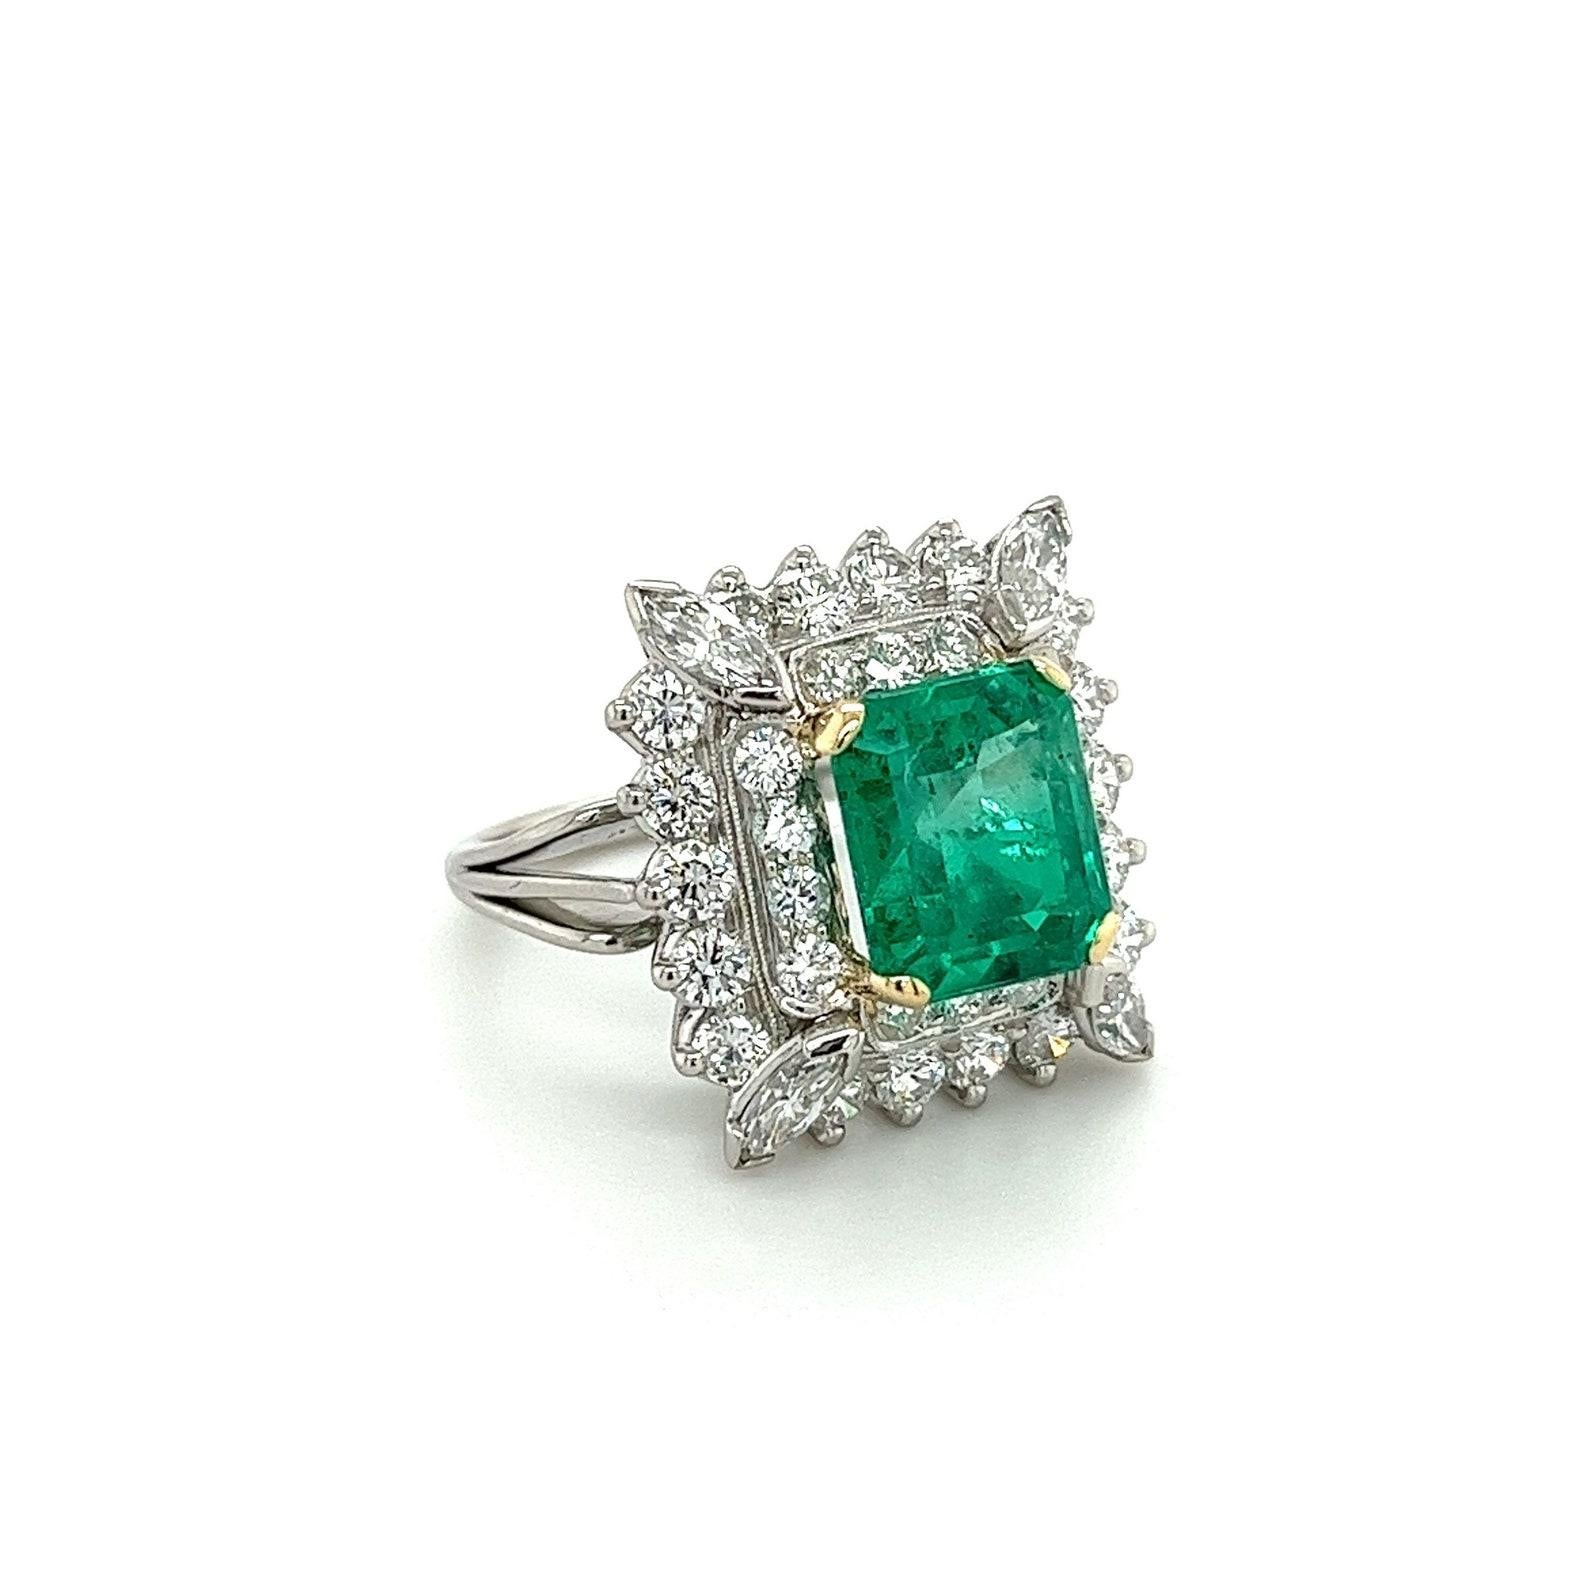 3.31 Carat Colombian Emerald & Diamond Halo Cocktail Ring in Platinum Setting For Sale 4